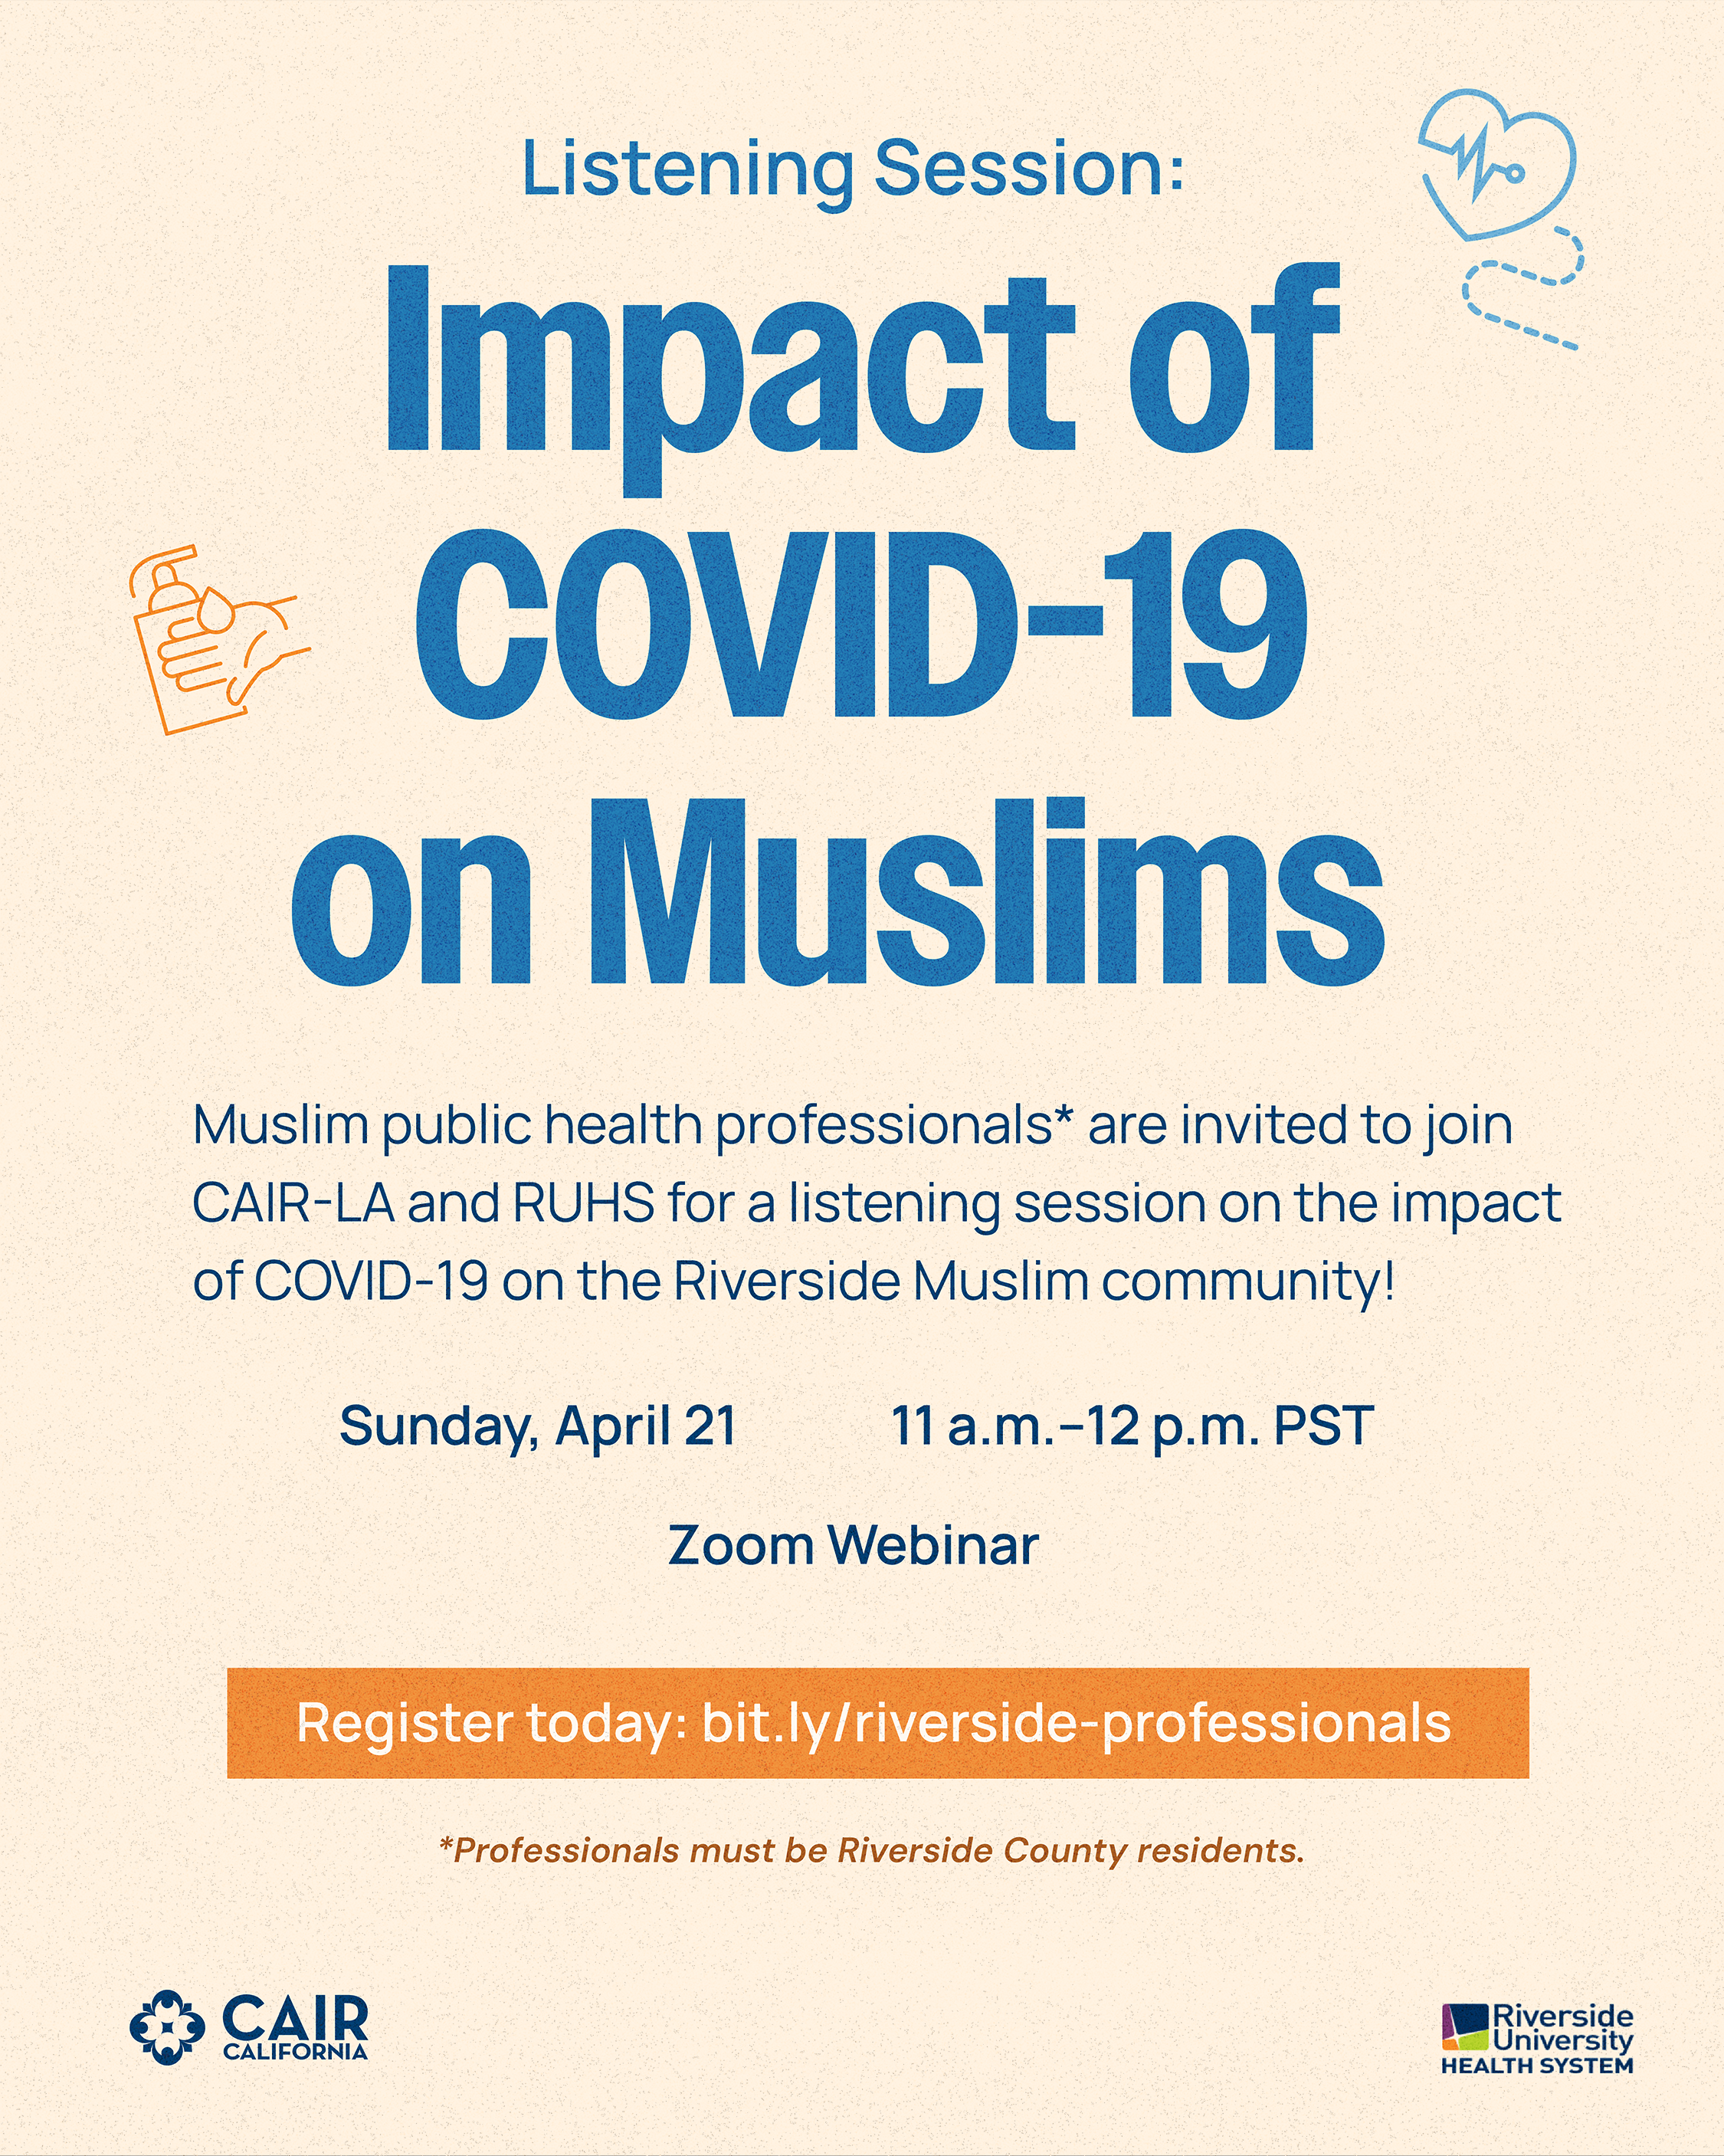 Professionals Listening Session: Impact of COVID-19 on Muslims, A Public Health Prospective